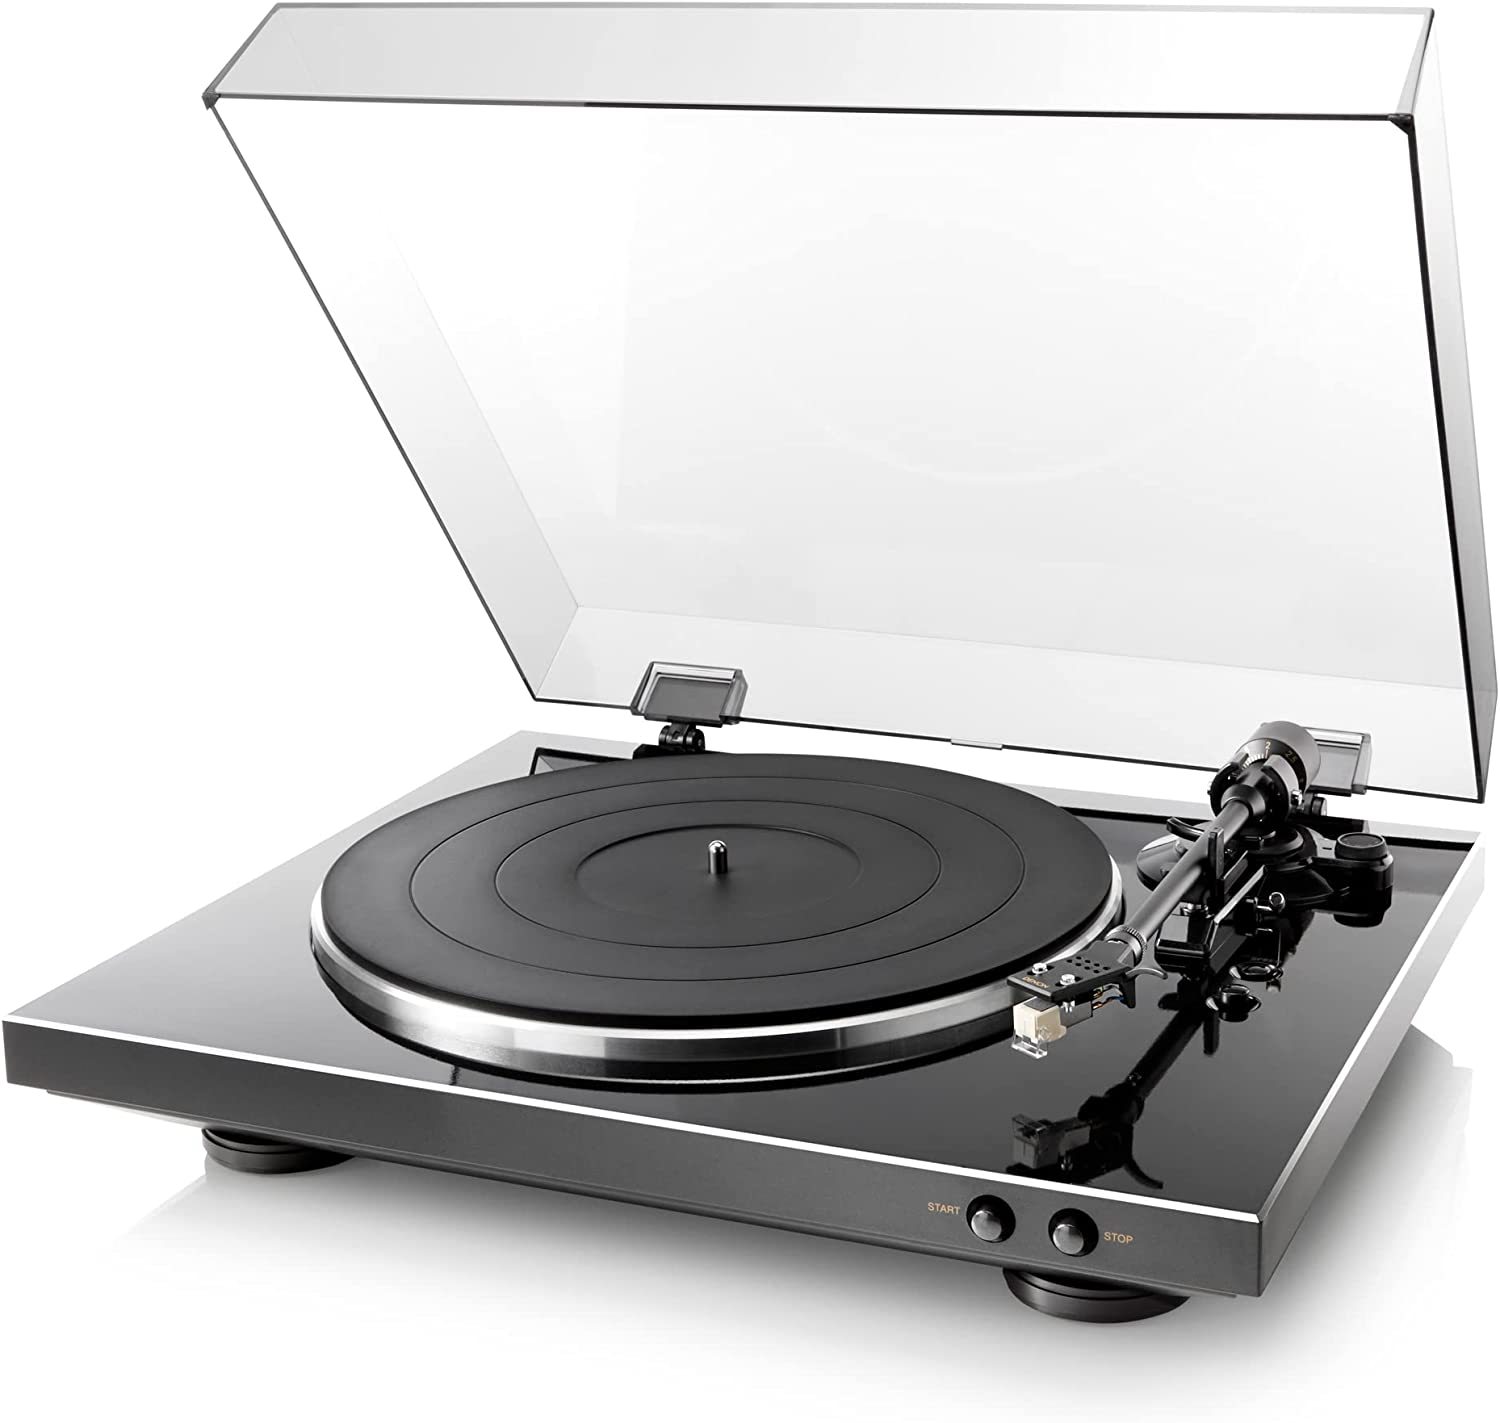 Denon DP-300F Fully Automatic Analog Turntable with Built-in Phono Equalizer | - $453.99